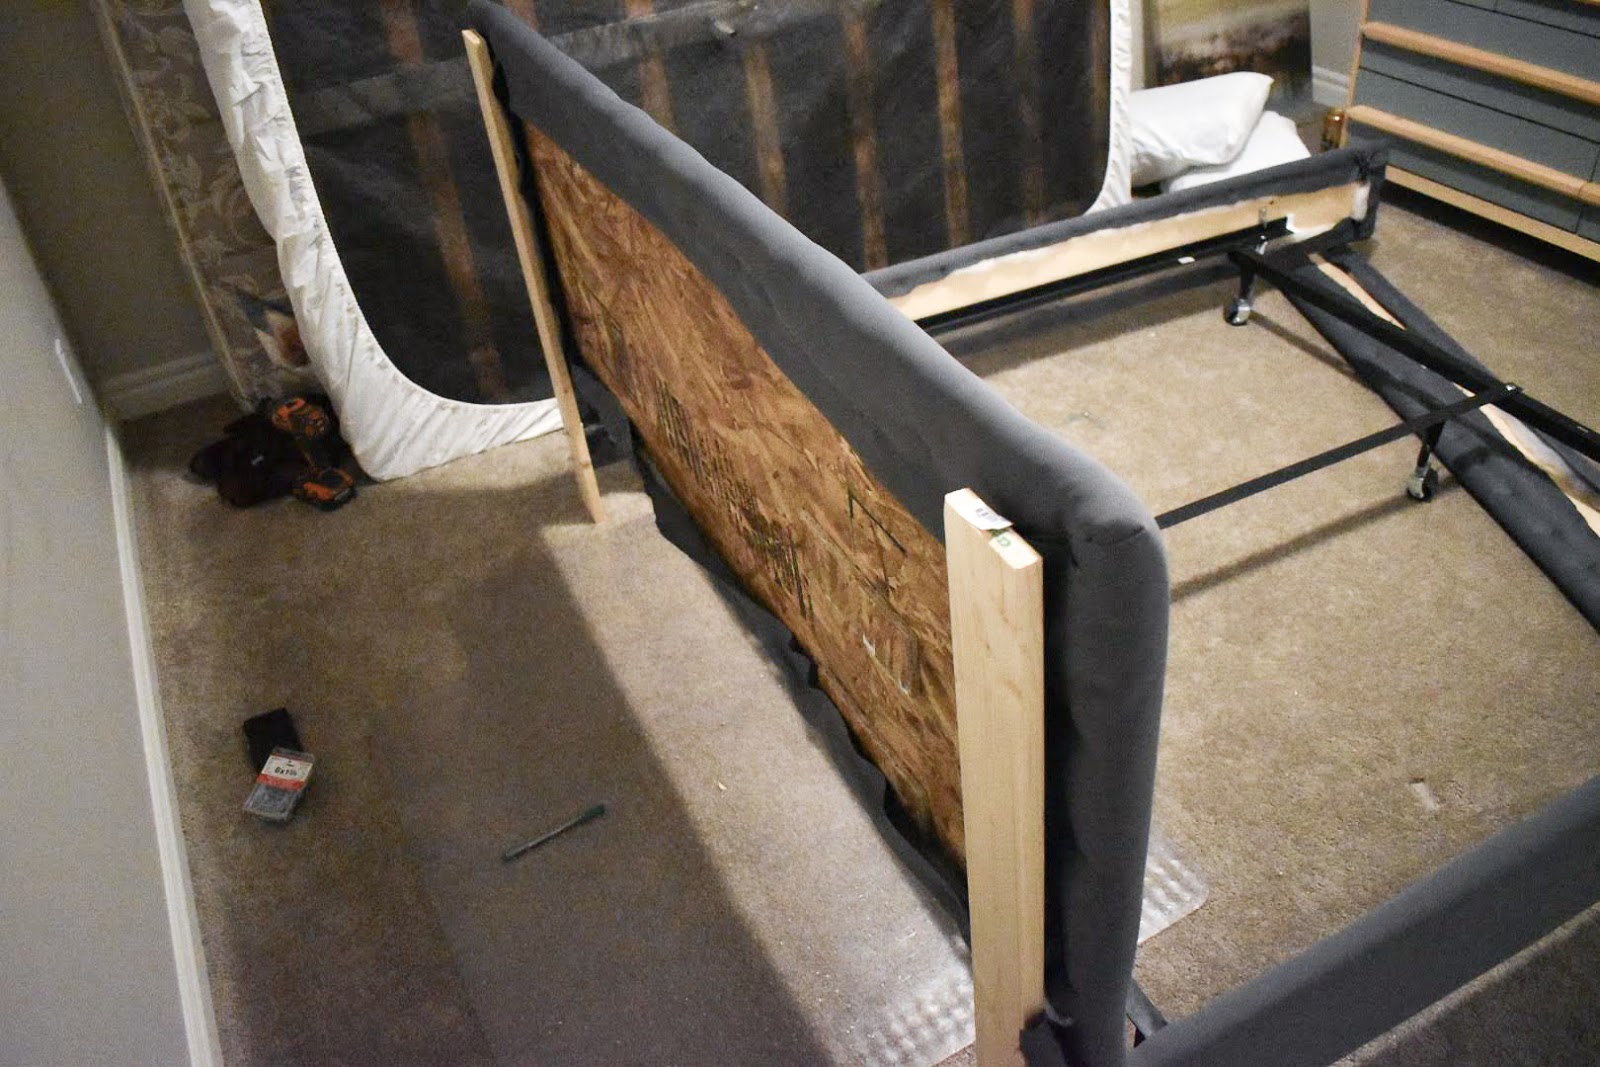 Metal Bed Frame Into An Upholstered, How To Attach Headboard Hollywood Frame